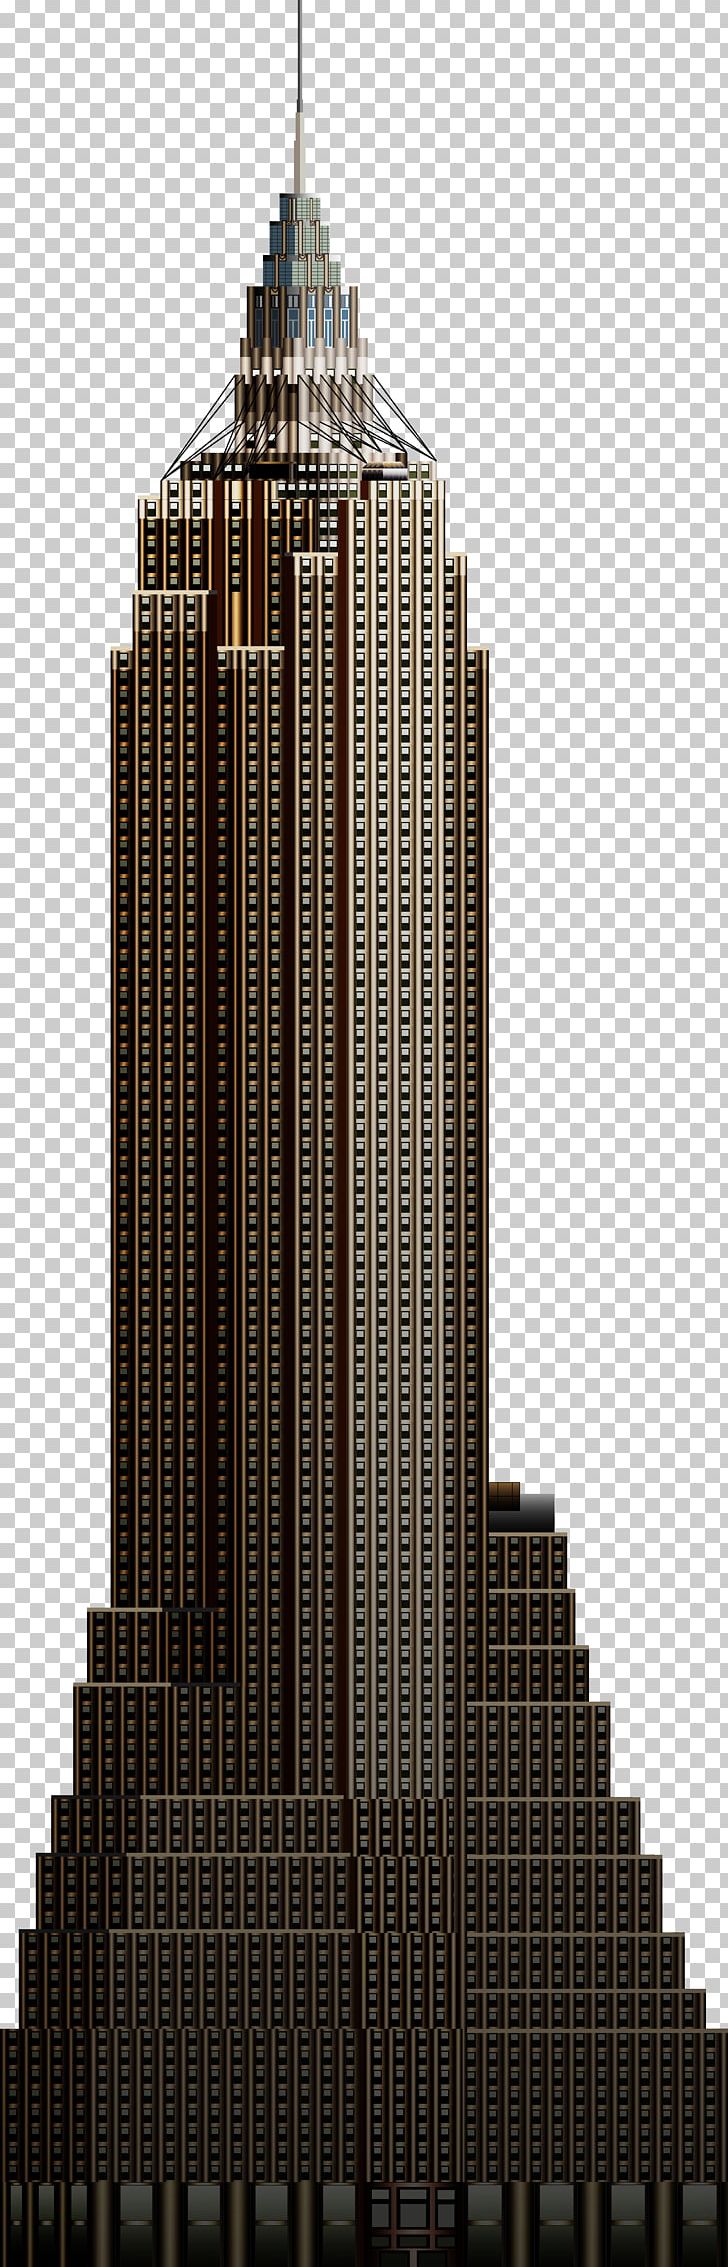 70 Pine Street Building Manhattan 60 Wall Street Architecture PNG, Clipart, 60 Wall Street, 70 Pine Street, Brutalist Architecture, City, Commercial Building Free PNG Download